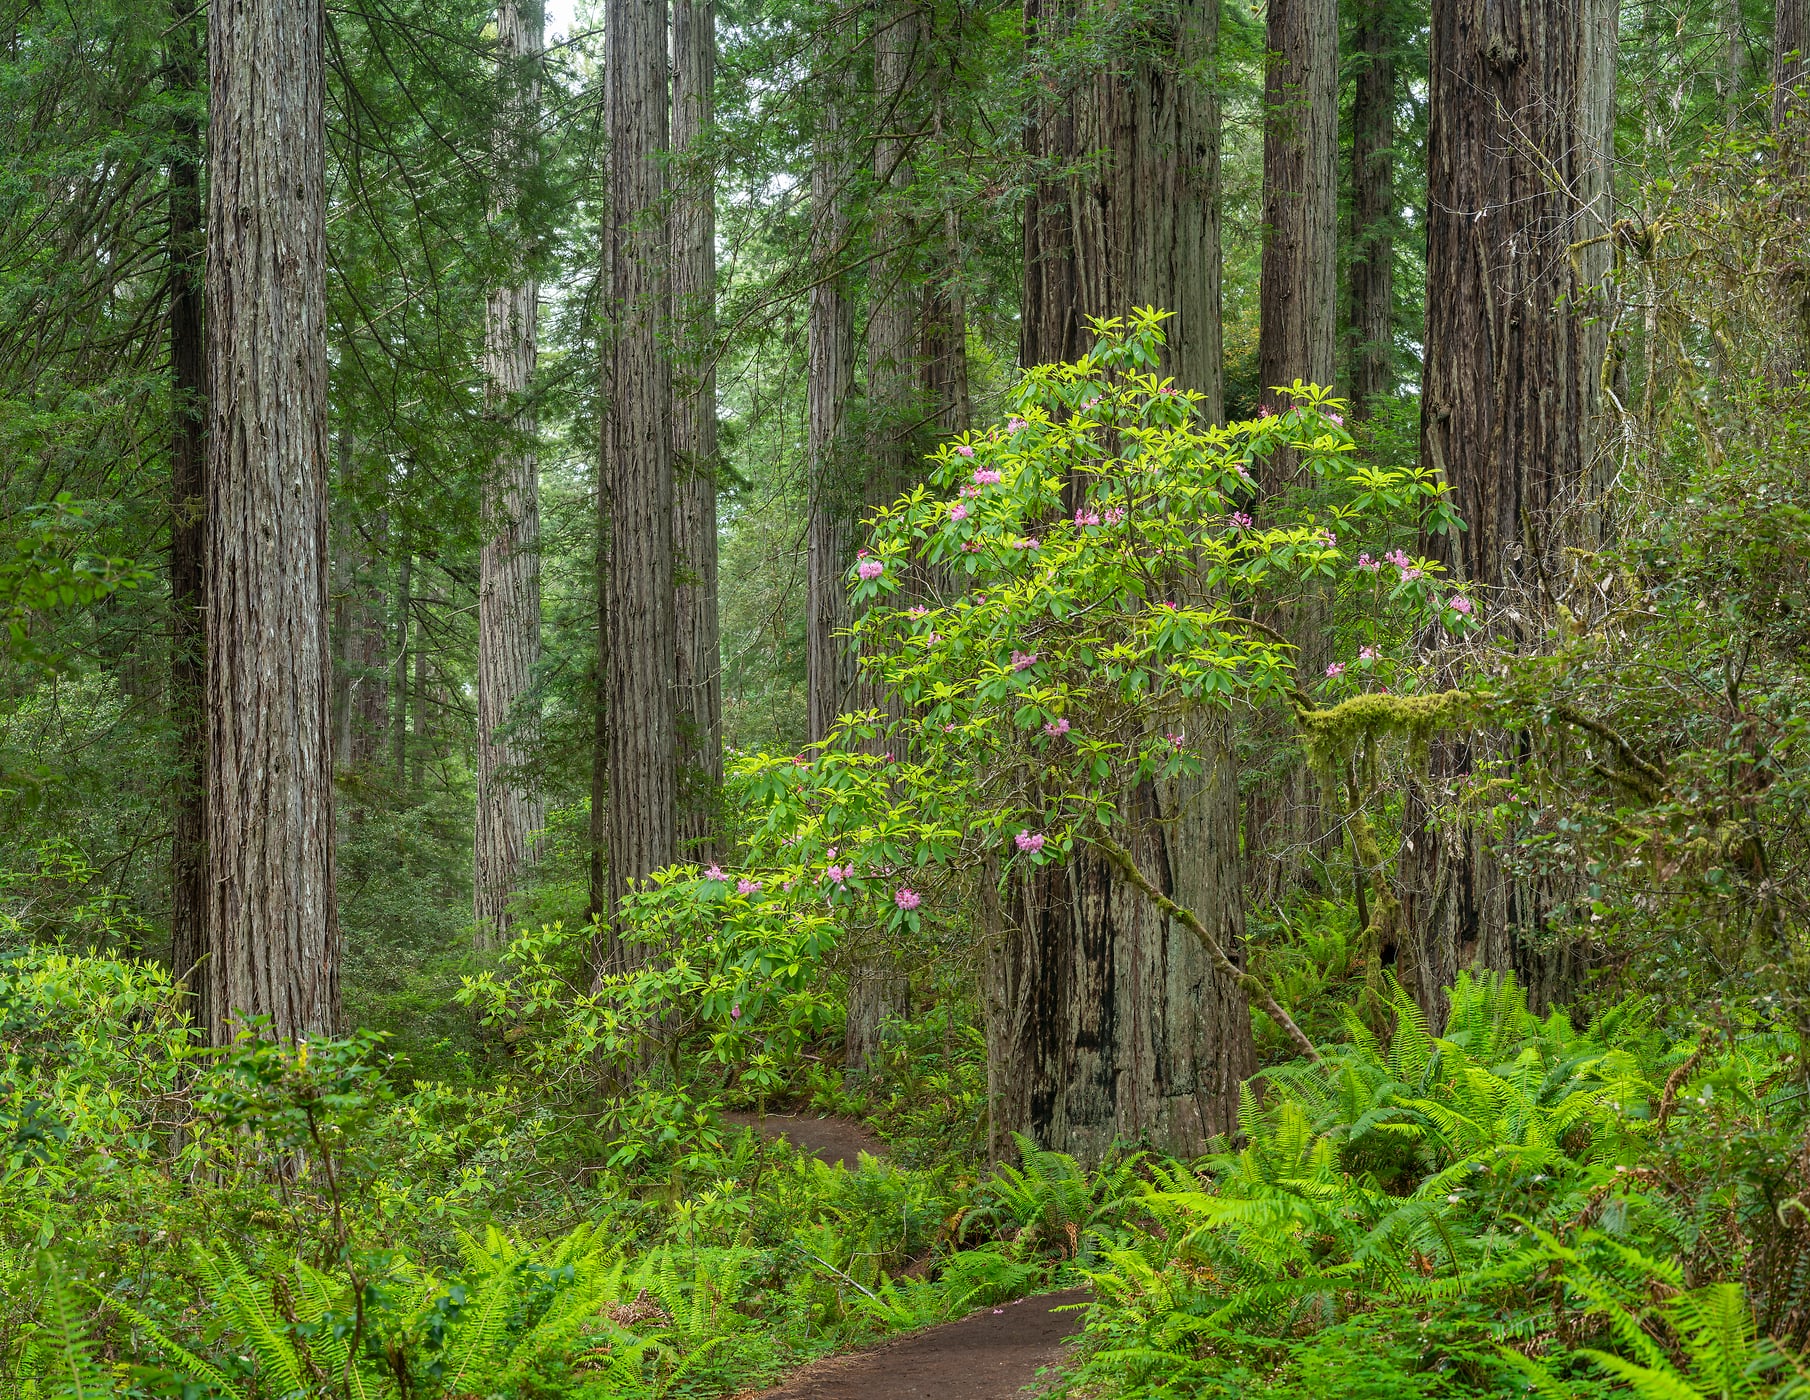 165 megapixels! A very high resolution, large-format VAST photo print of redwoods and rhododendrons along a hiking trail in a forest; nature photograph created by Greg Probst in Redwood National and State Parks, California.